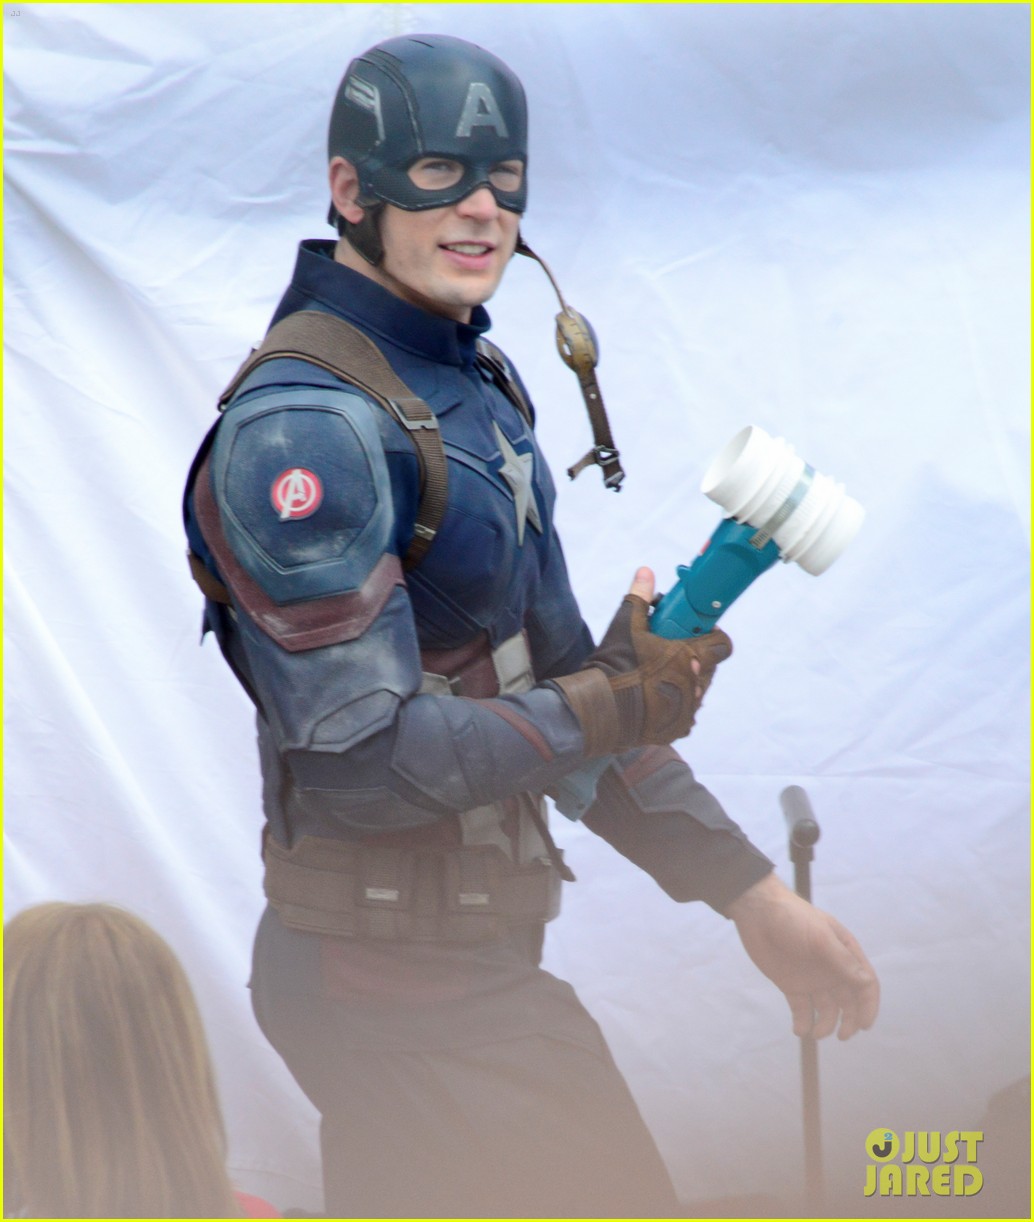 captain-americas-new-weapon-is-a-enter-our-poll-02.jpg